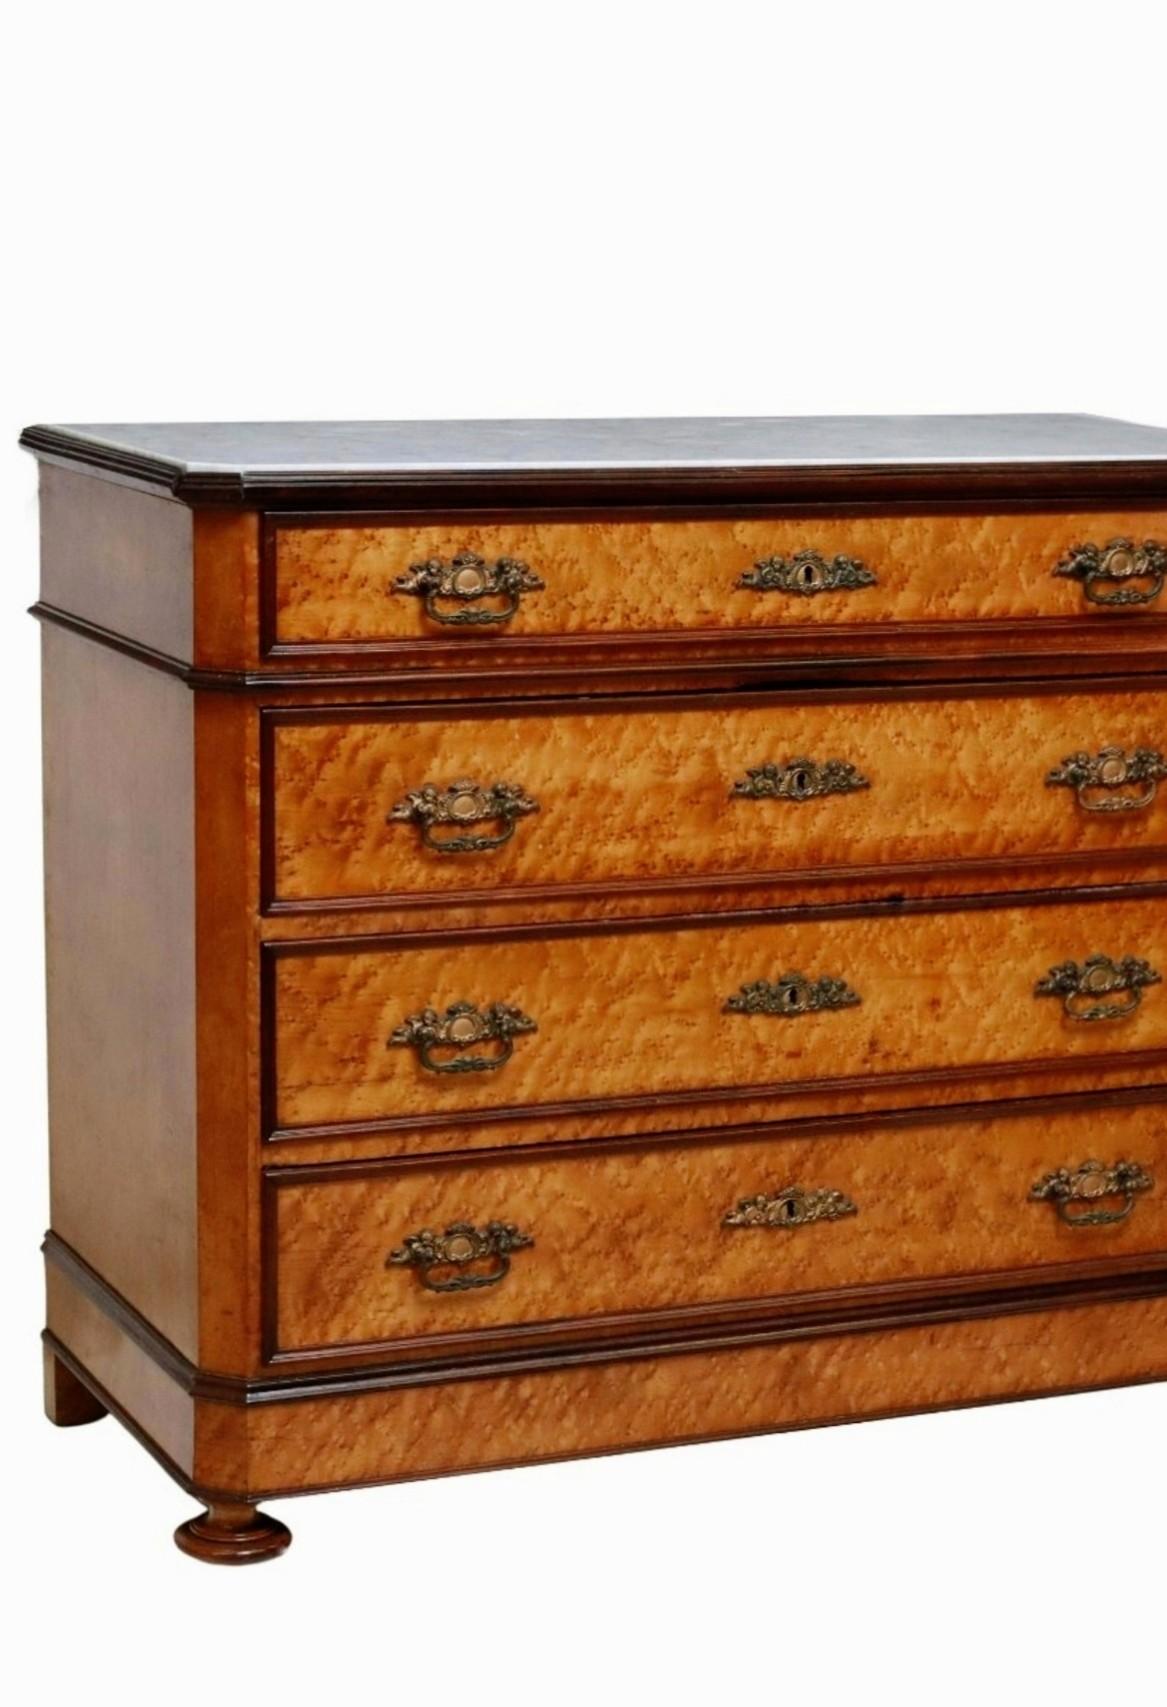 19th Century Italian Bird’s-Eye Maple Chest of Drawers Commode For Sale 2